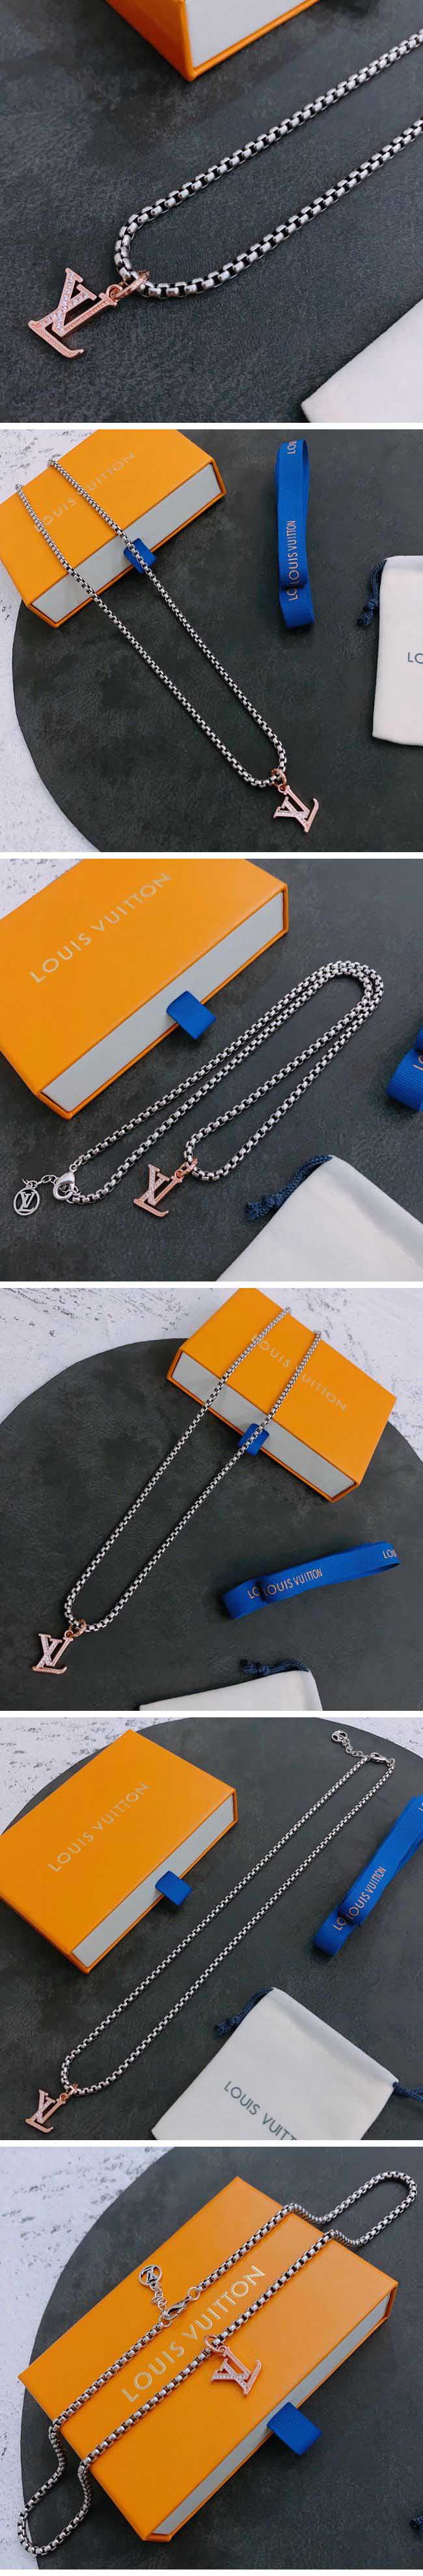 Louis Vuitton Pink Gold LV Charm Necklace ルイヴィトン ピンクゴールド LV チャーム ネックレス